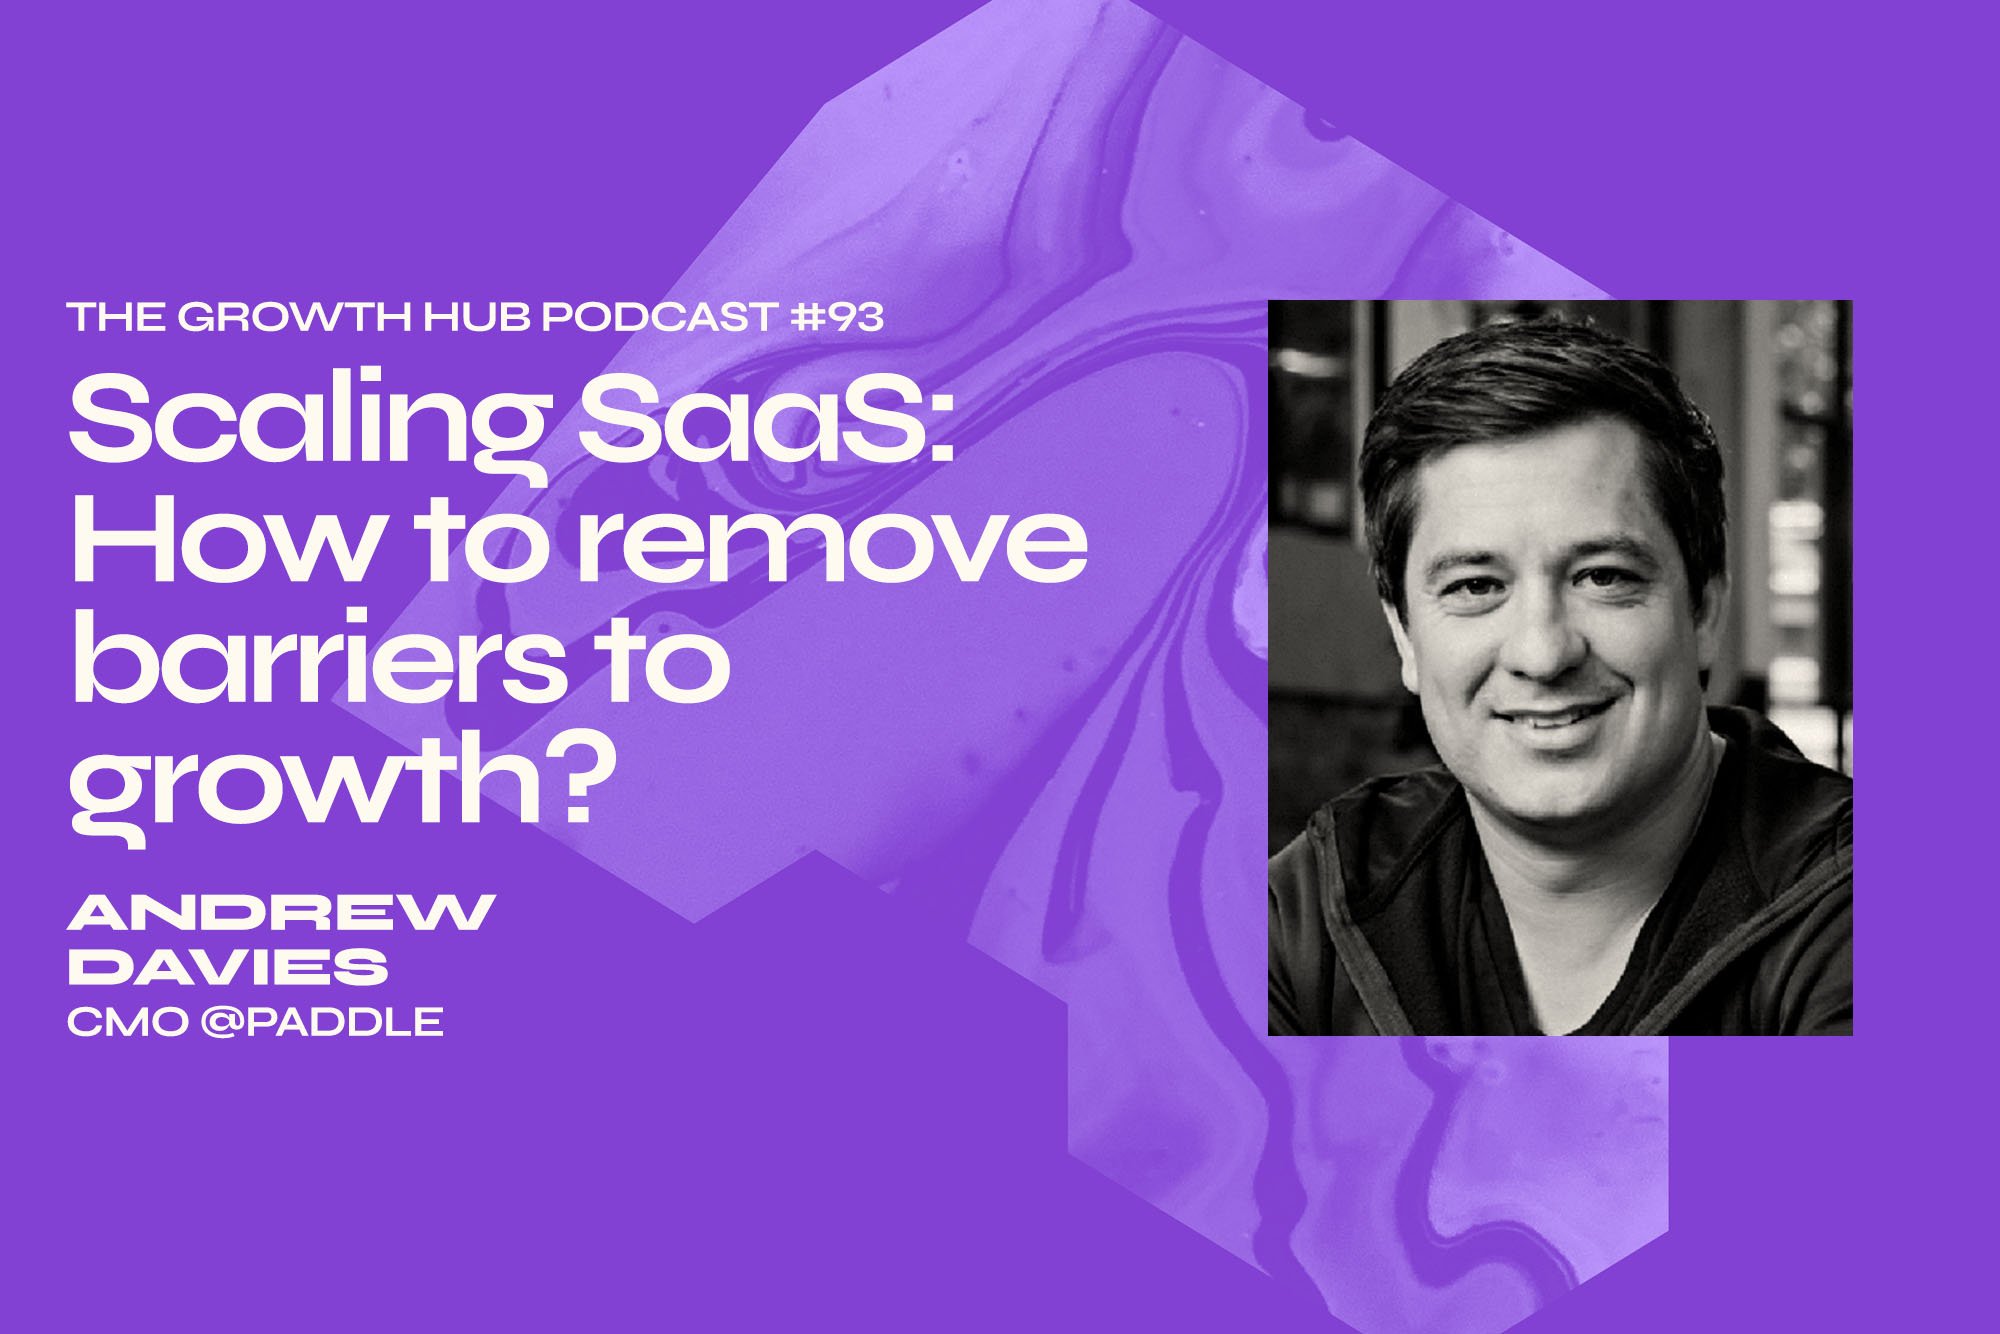 Scaling SaaS: How to remove barriers to growth?